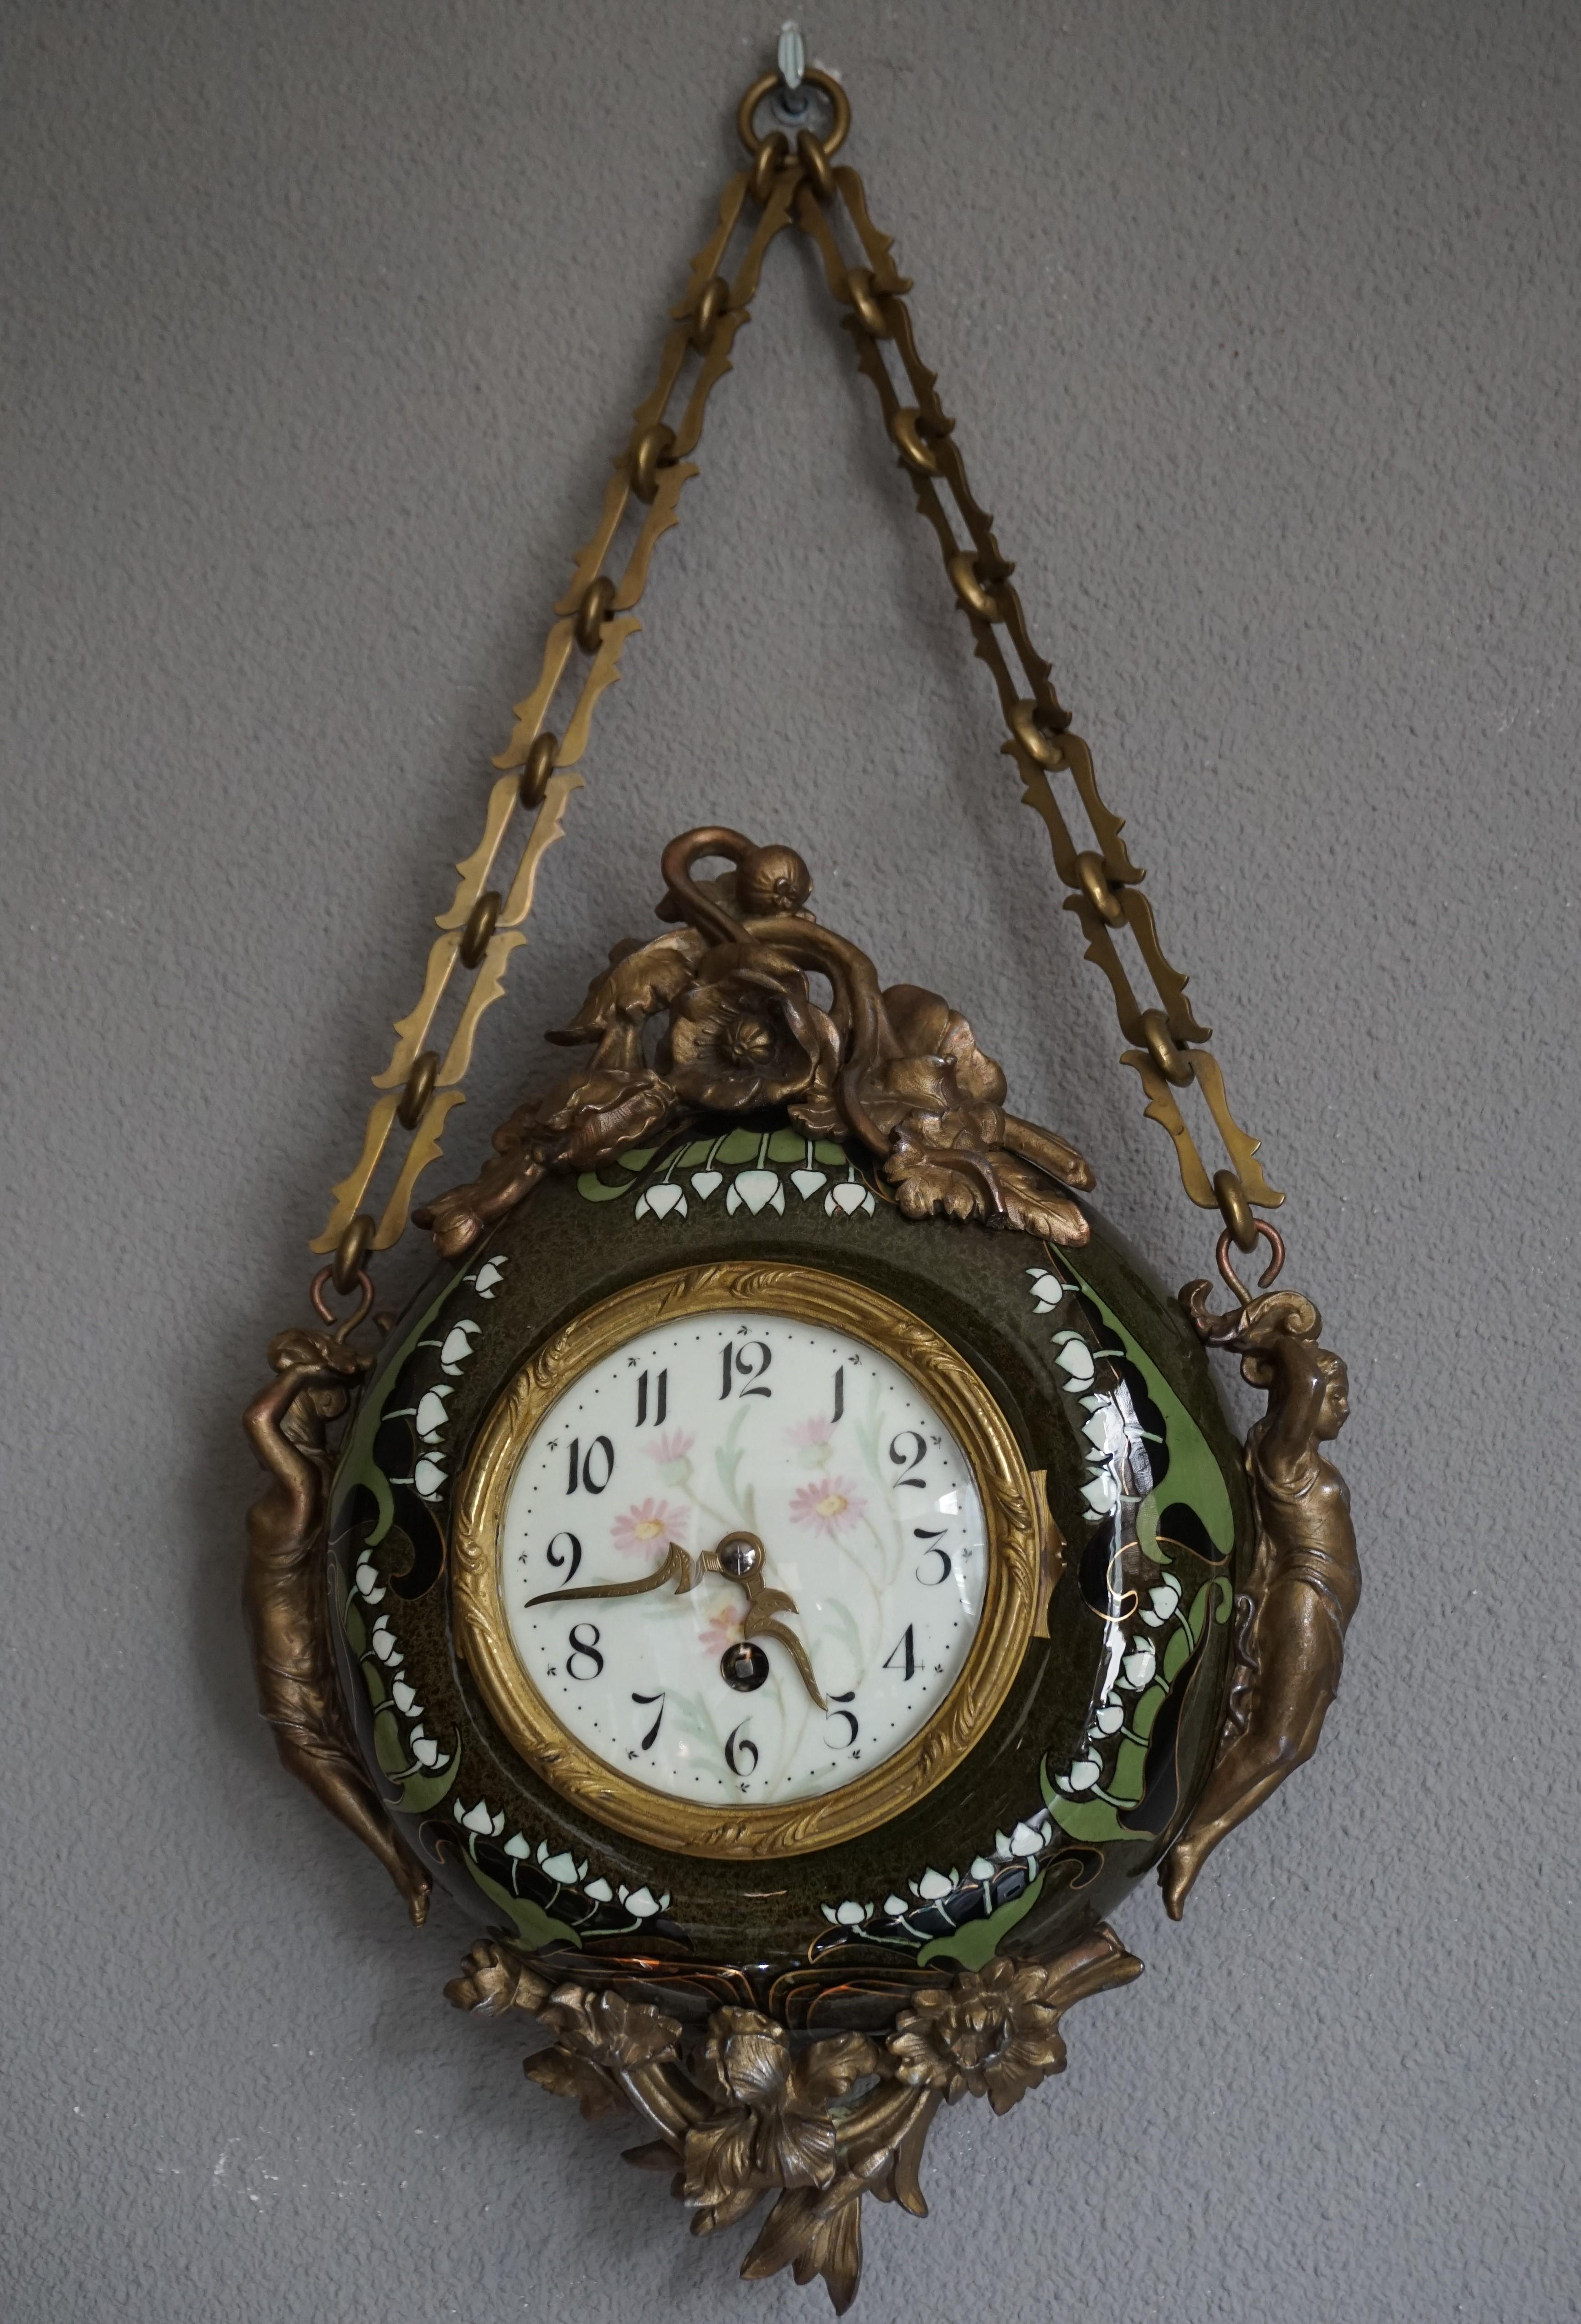 Stunning and perfect running wall clock from the Art Nouveau and Jugendstil era.

If you like rare Arts & Crafts antiques in general and marvelous clocks in particular then this handcrafted wall clock from circa 1900-1910 could be the perfect